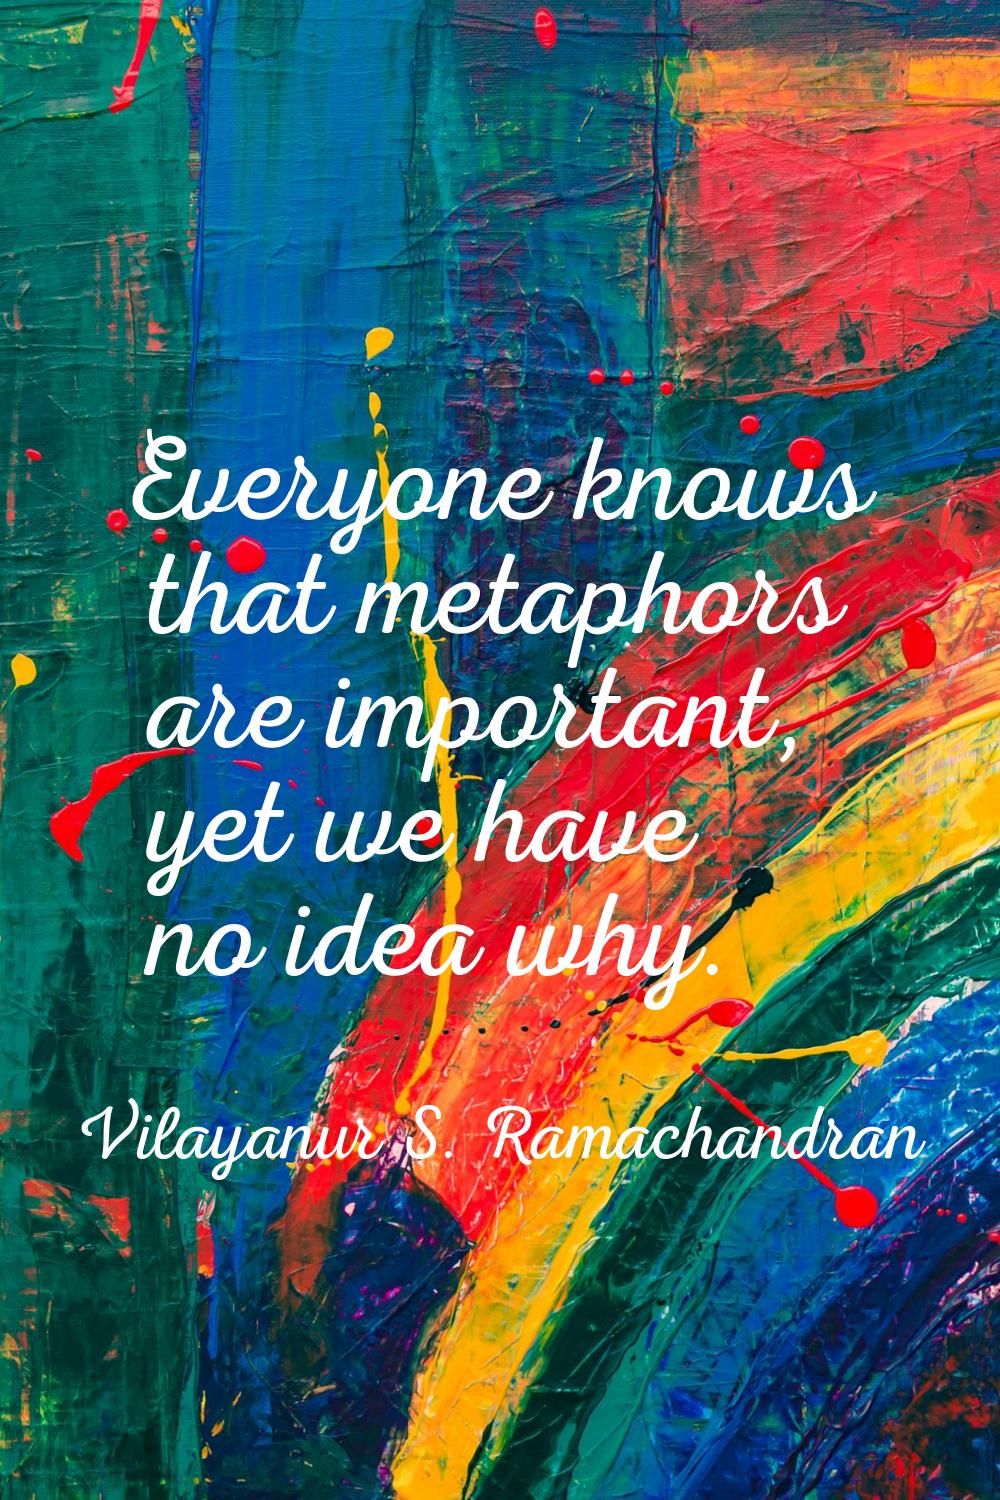 Everyone knows that metaphors are important, yet we have no idea why.